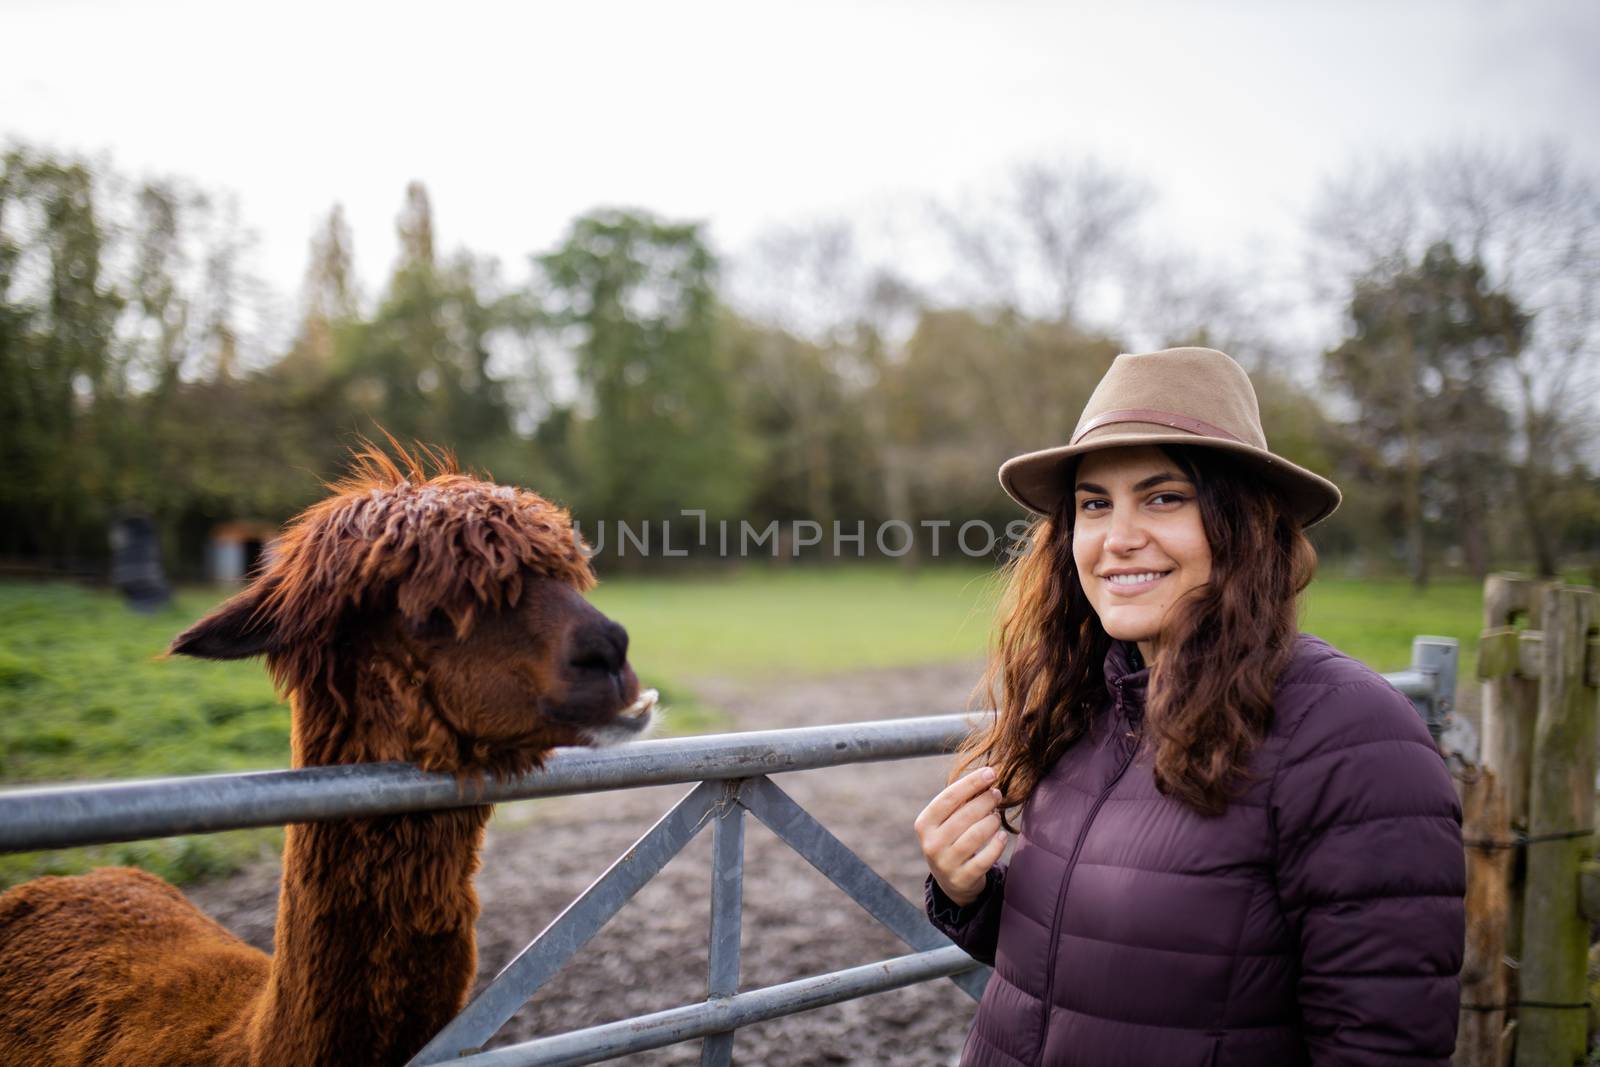 Smiling woman wearing a hat next to a brown alpaca behind a fence by Kanelbulle